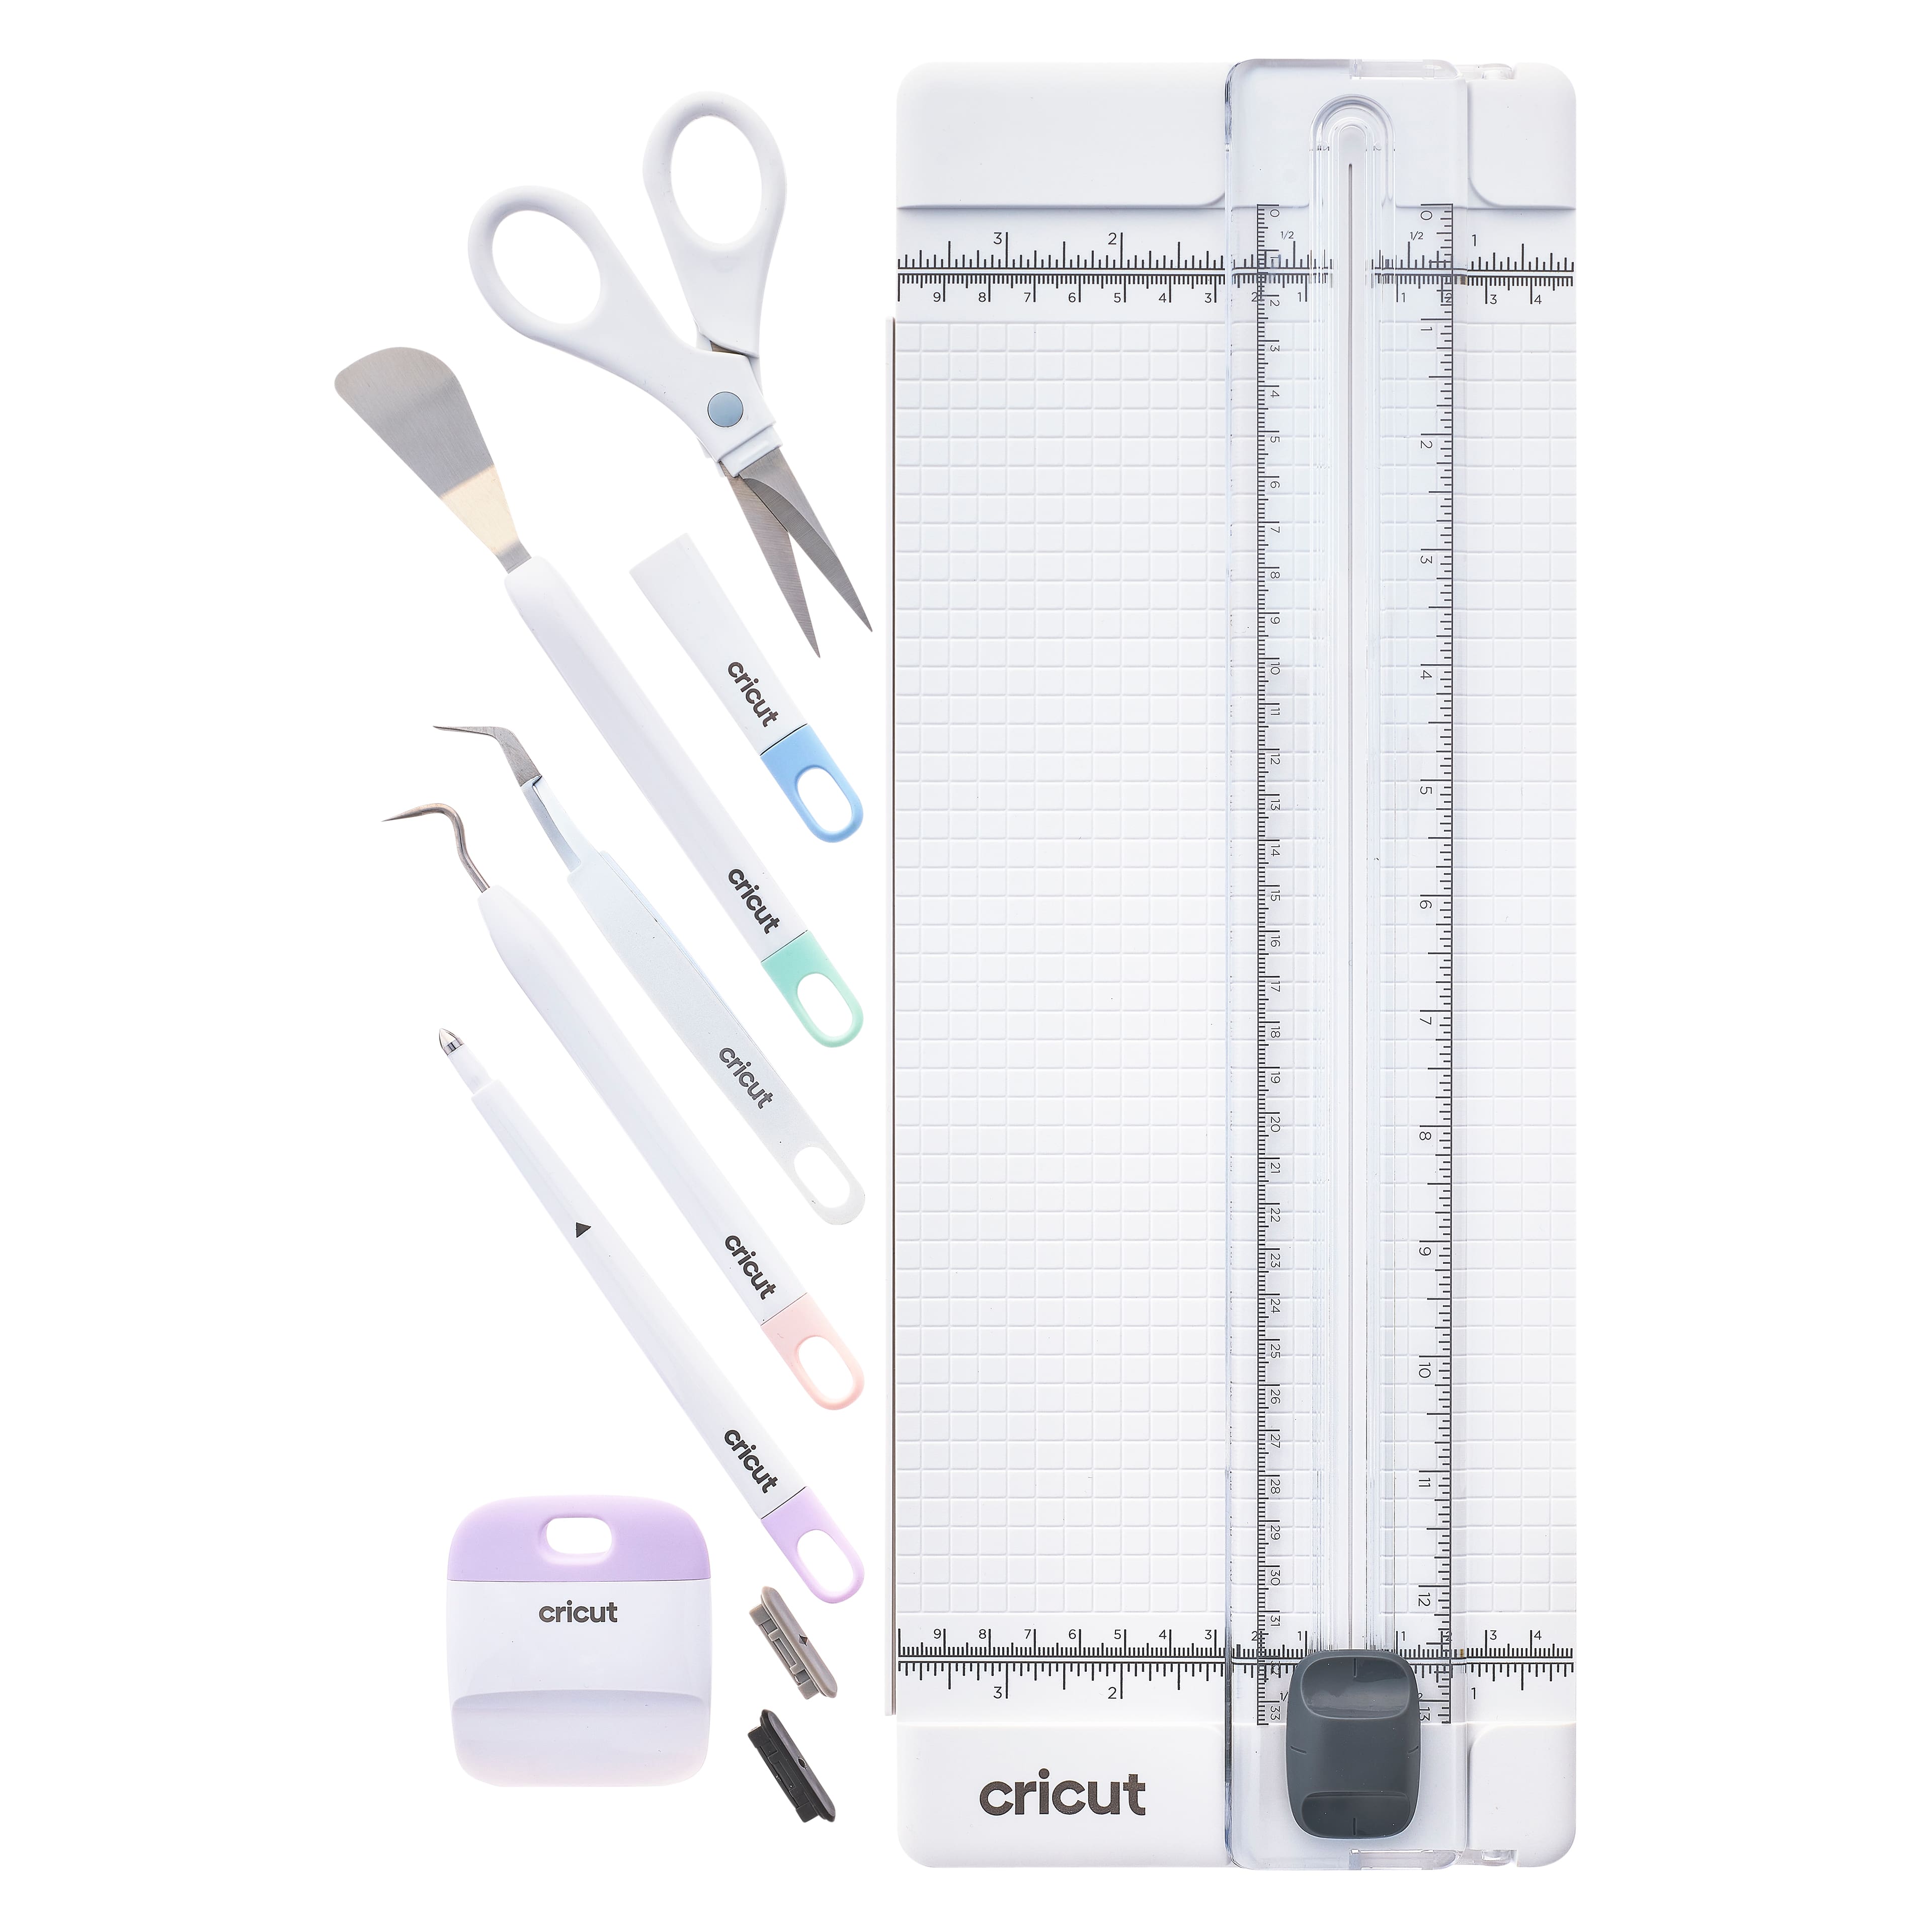 Cricut- Essential Tool Set for Sale in San Diego, CA - OfferUp